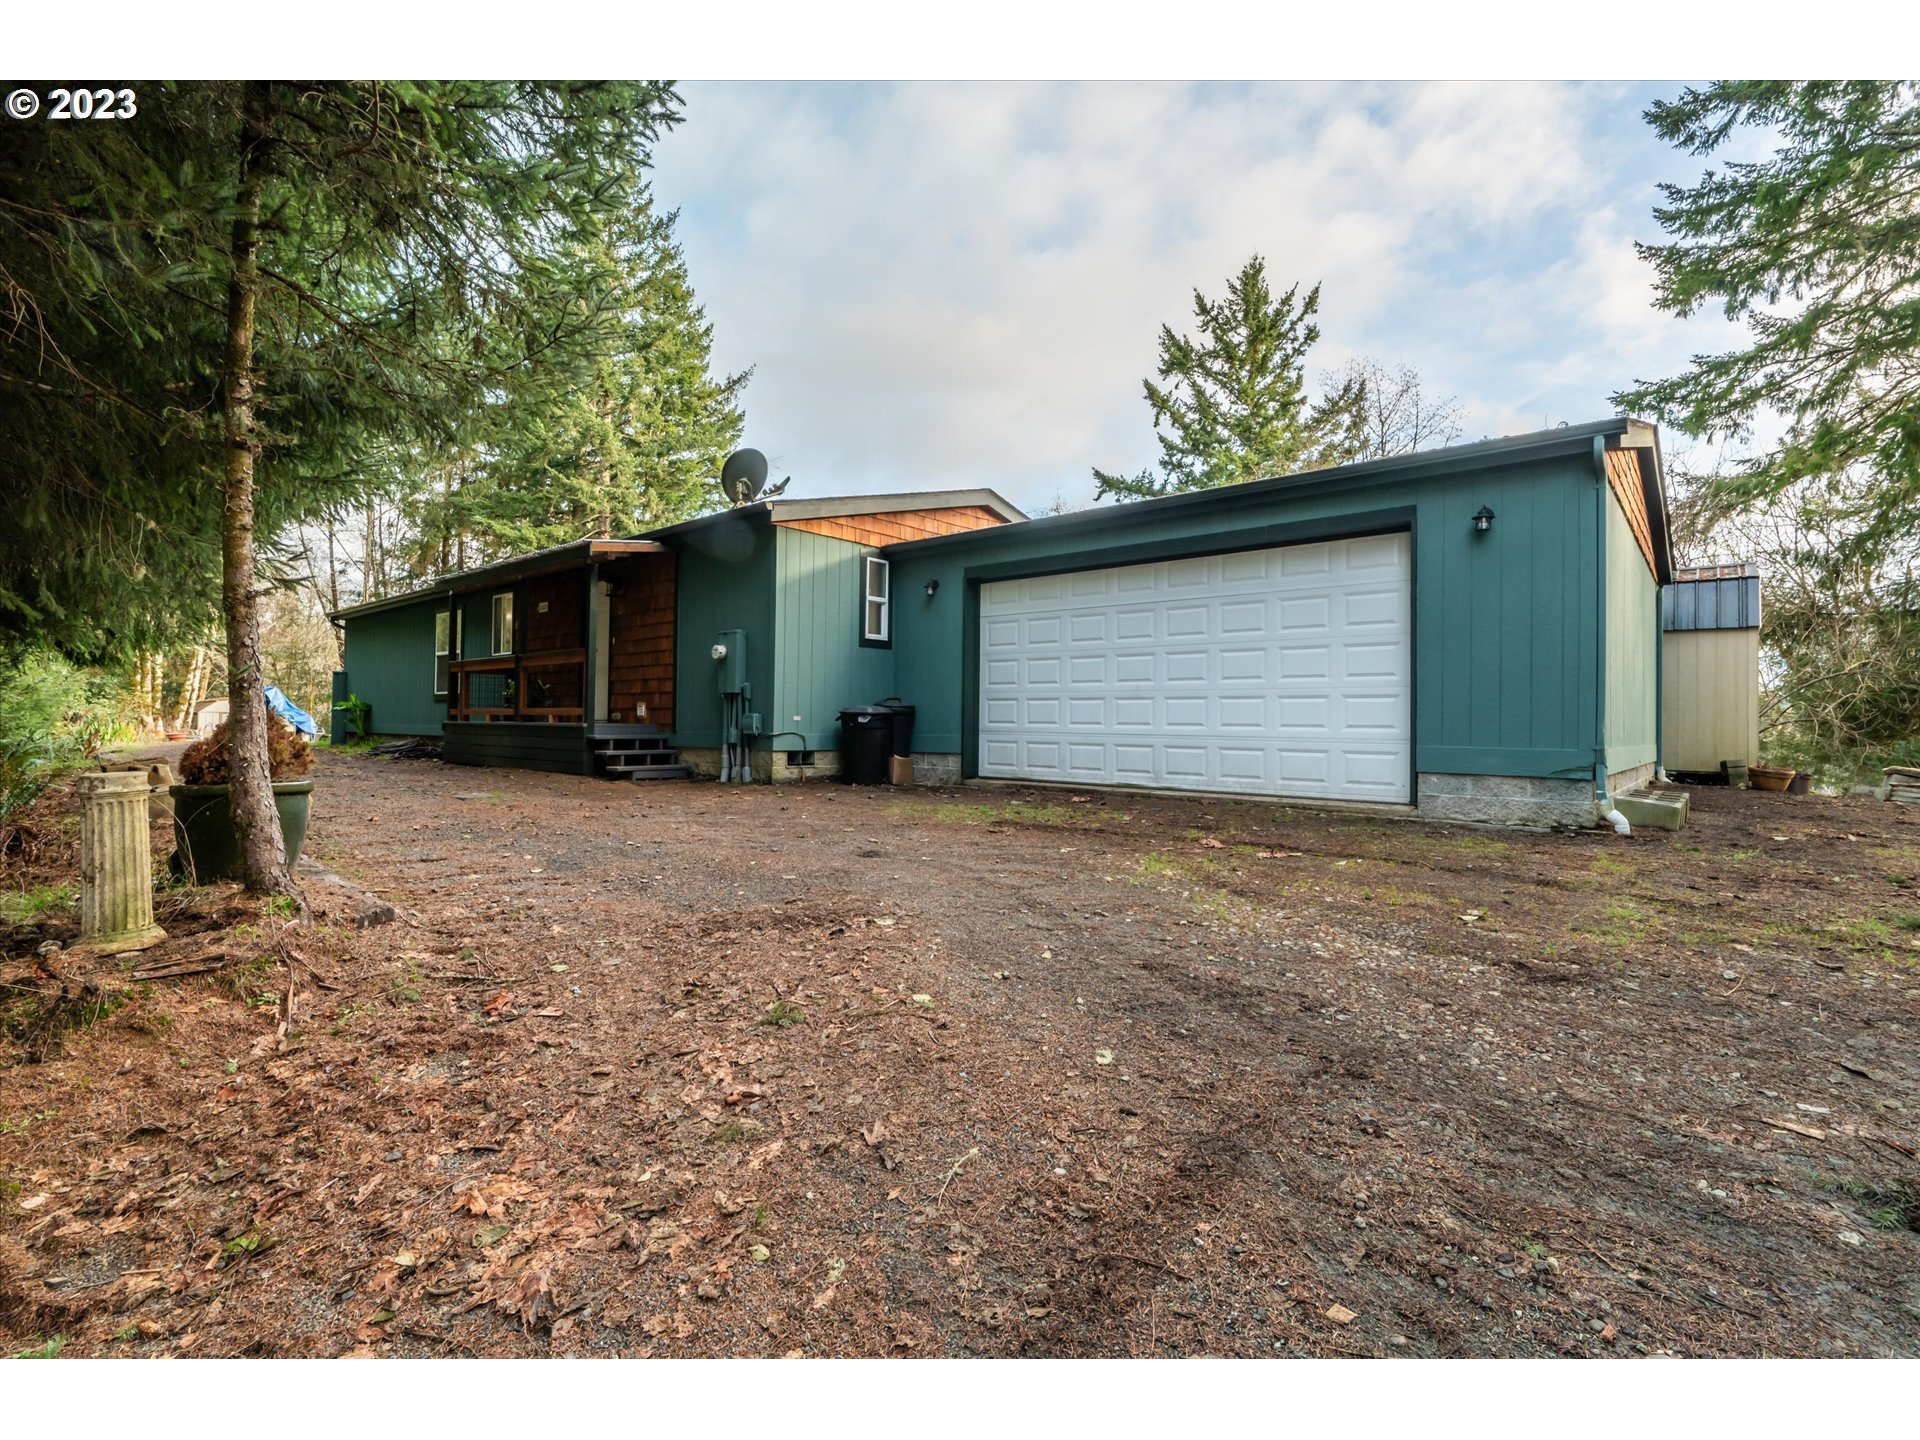 251 COUNCIL HILL RD, Lakeside, OR 